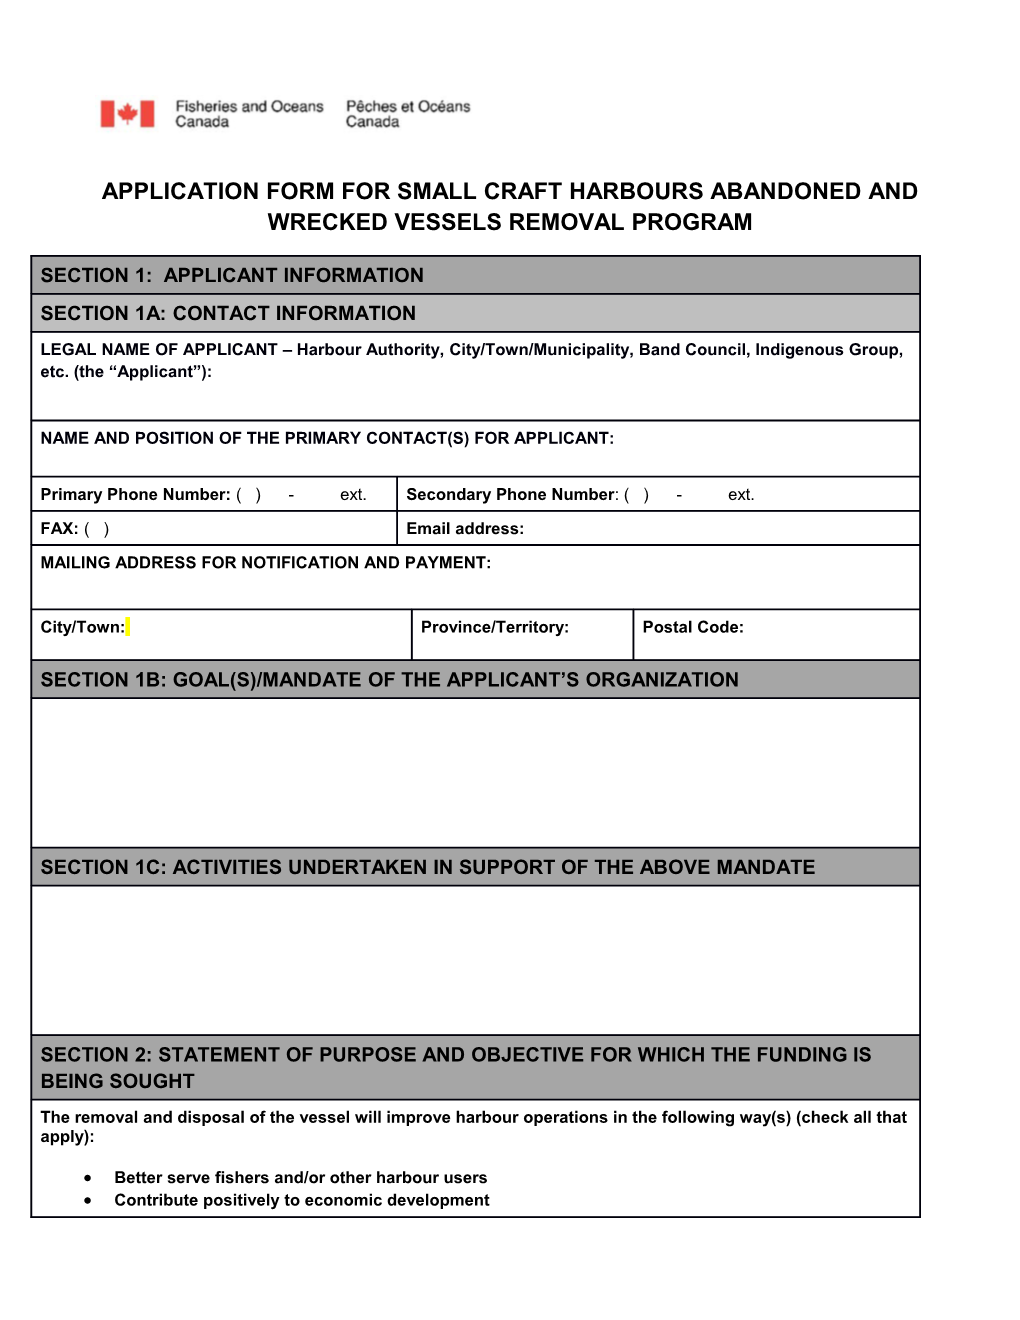 Application Form for Small Craft Harboursabandoned and Wrecked Vessels Removal Program